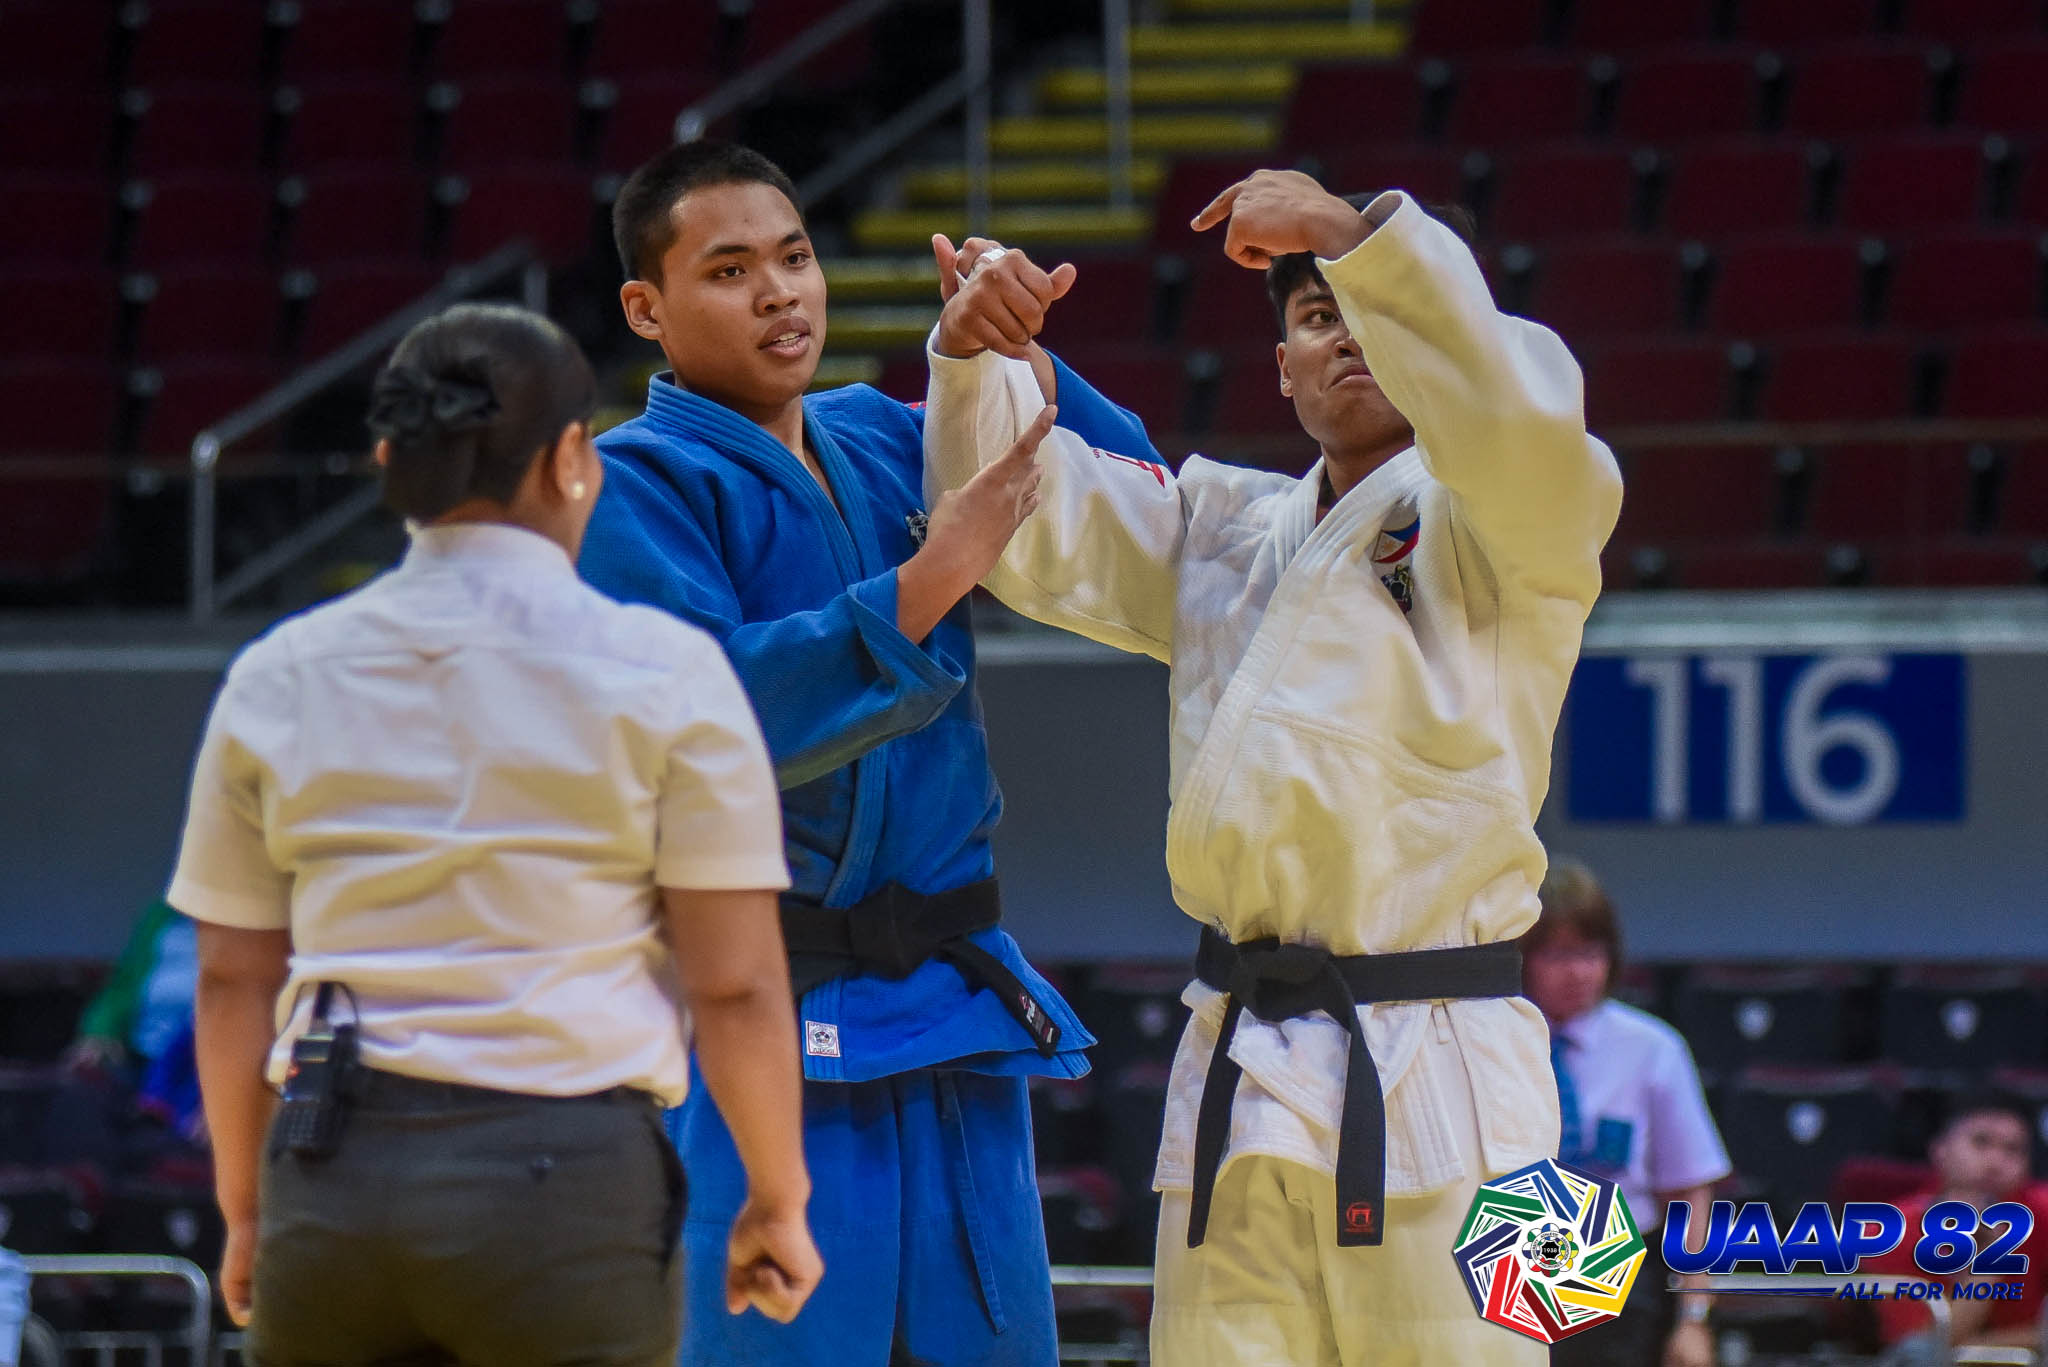 UAAP82-JUDO-SRS-90KG-MENS-4TH-PHOTO-WHITE-FERRER-UP-BLUE-AVENDANO-UP Zarchie Garay stuns Keith Reyes as UP holds lead over UST in UAAP Judo ADMU DLSU Judo News UAAP UP UST  - philippine sports news